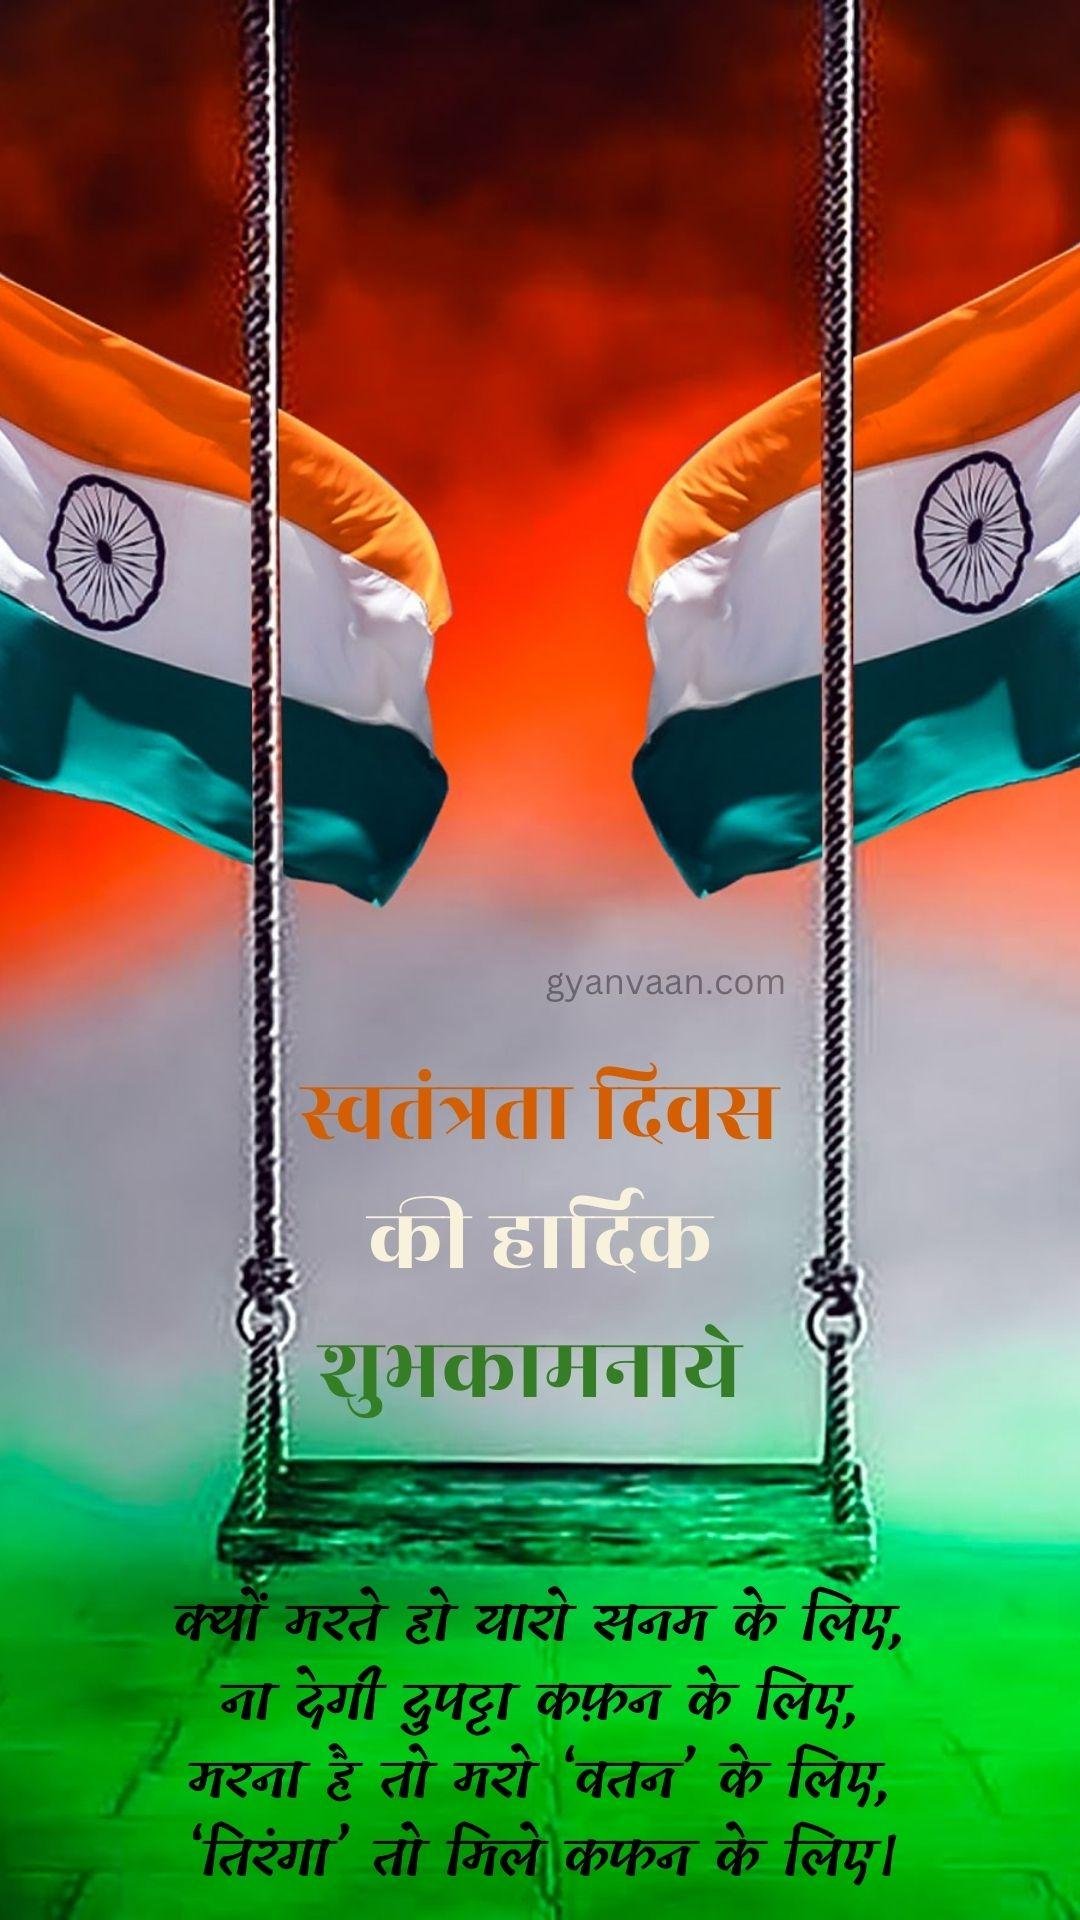 Independence Day Quotes In Hindi With Shayari Slogan Wishes For Whatsapp Status Mobile 50 - Independence Day Quotes In Hindi